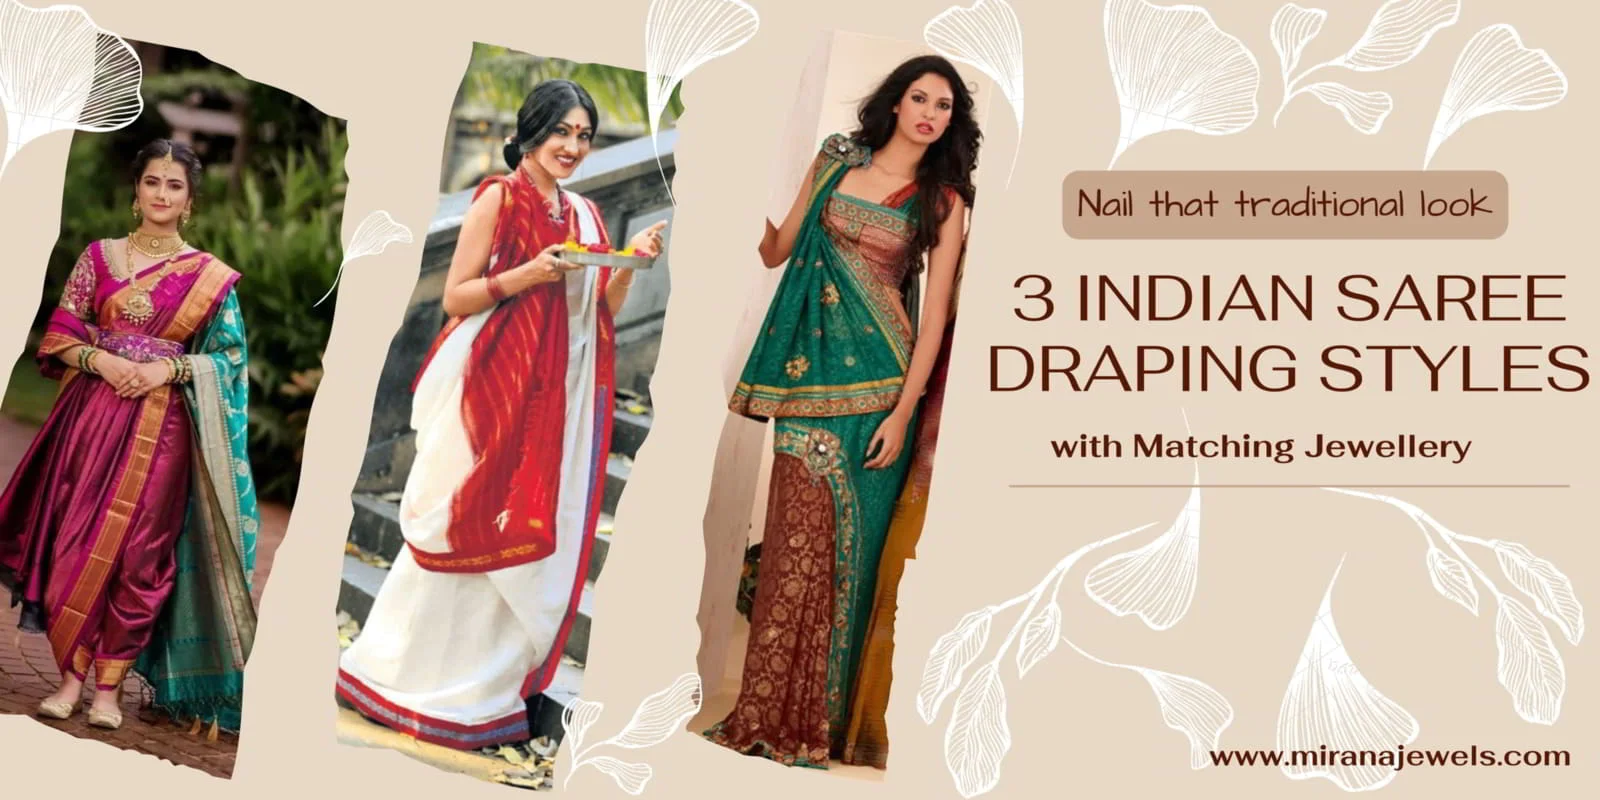 Blog Banner Traditional Look 3 Indian Saree Draping Styles.jpg